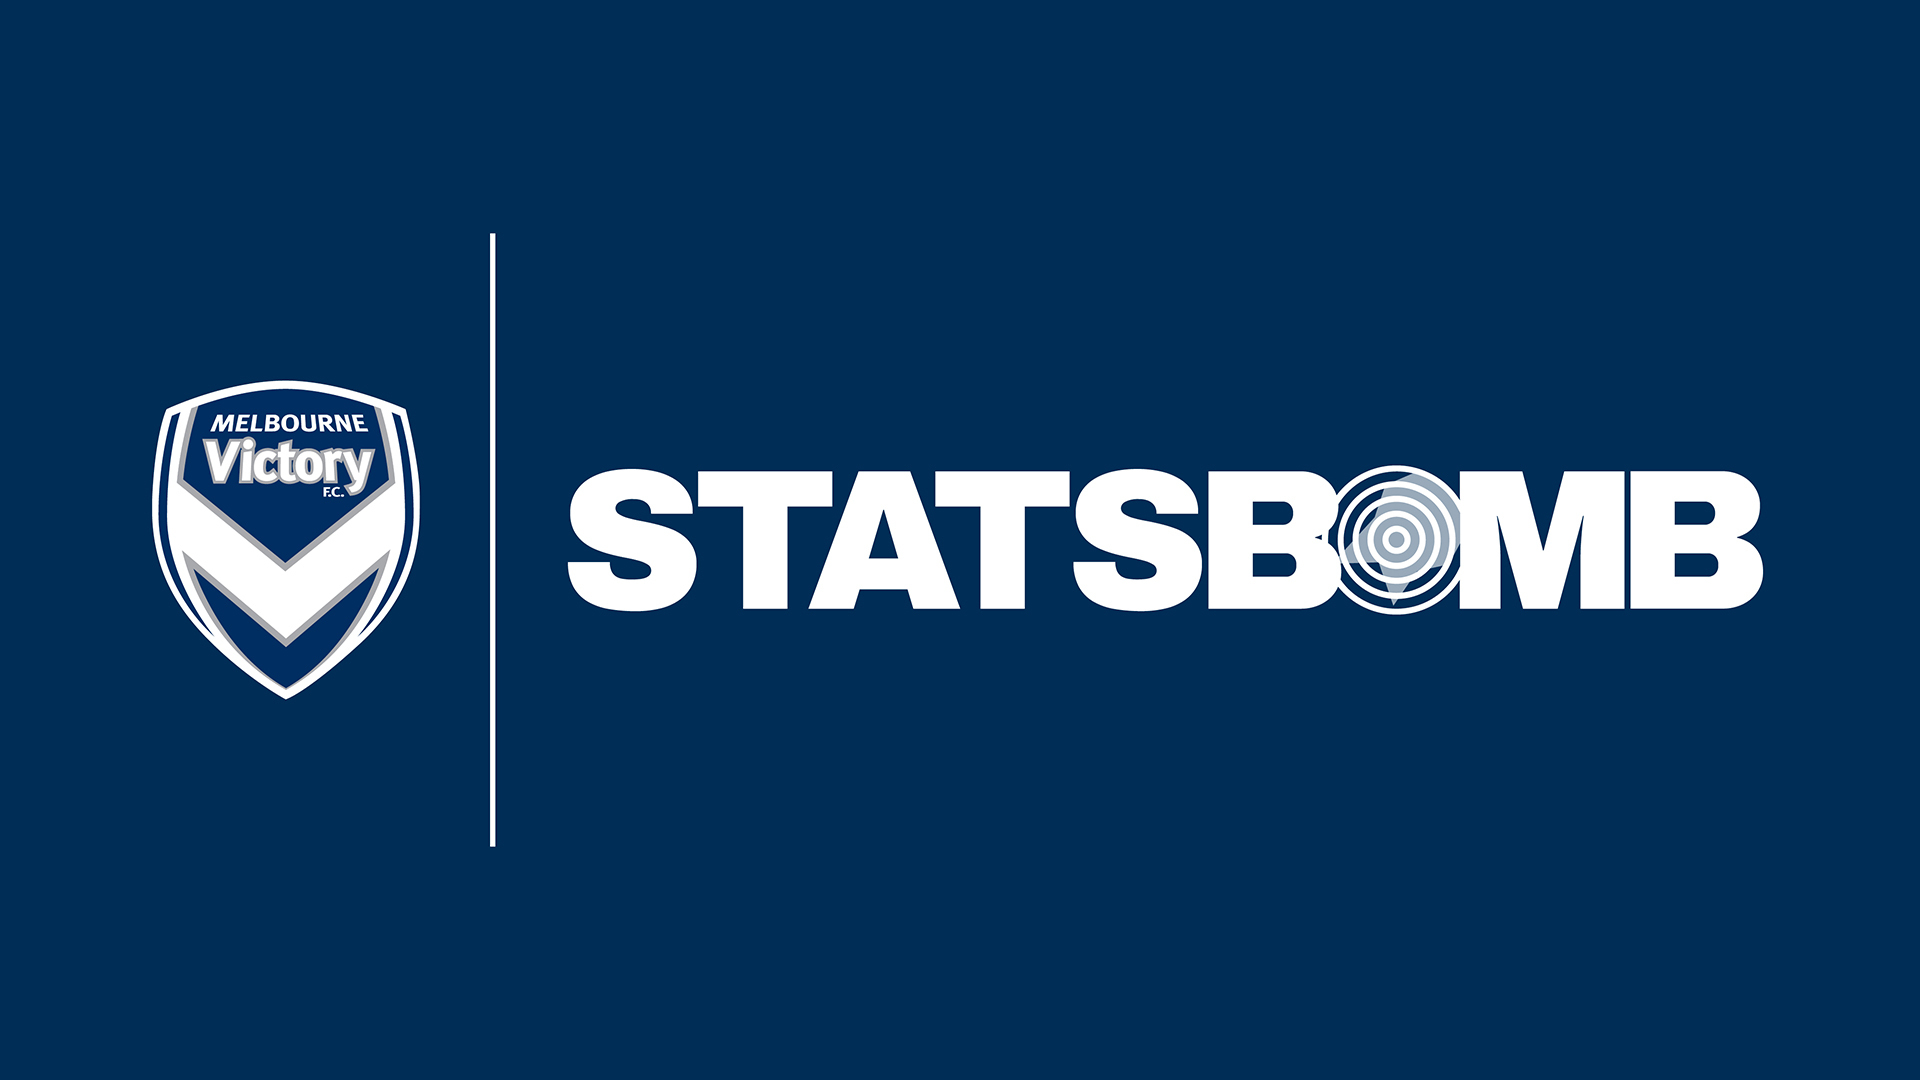 StatsBomb Enter Australian Market By Reaching Agreement With Melbourne Victory